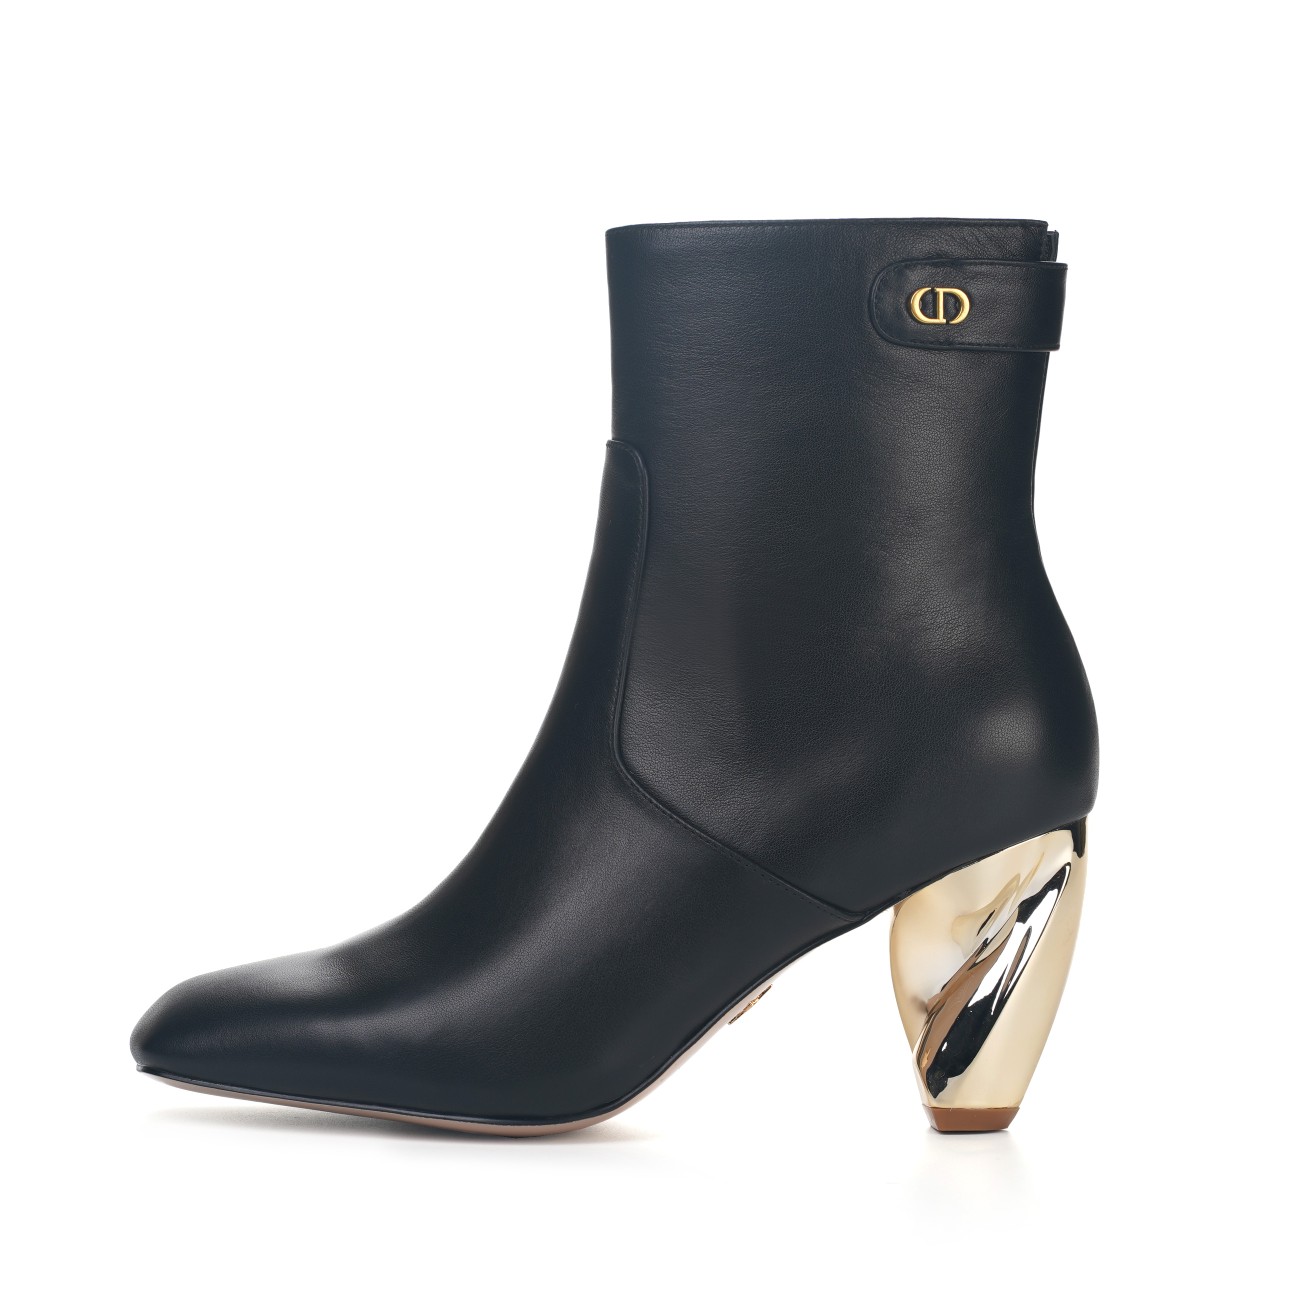 Dior Rhodes Heeled Ankle Boot For Women # 262777, cheap Dior Boots, only $95!